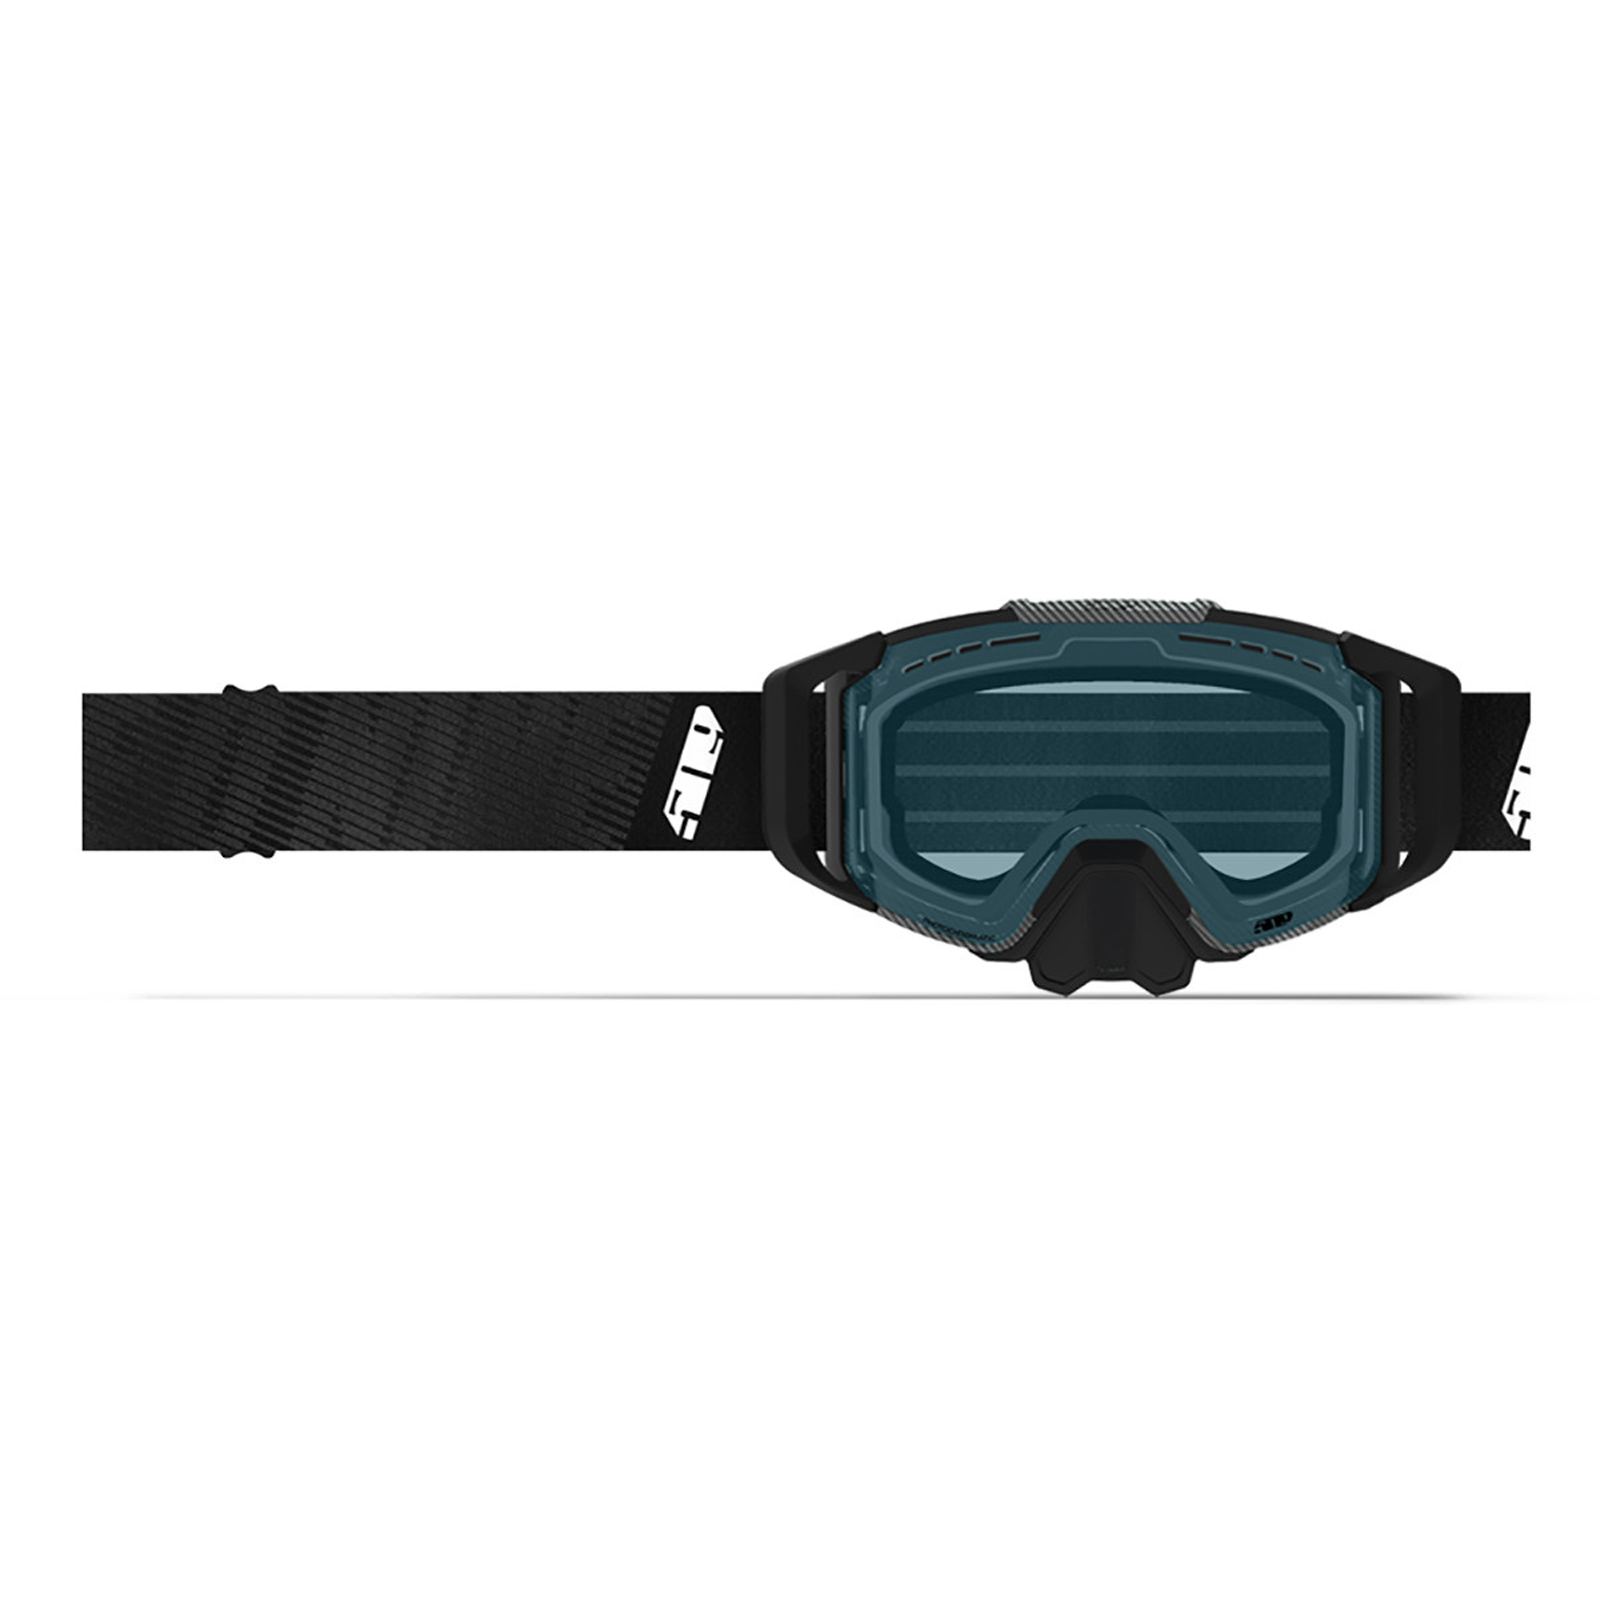 Short Straps for Sinister X6 Goggle